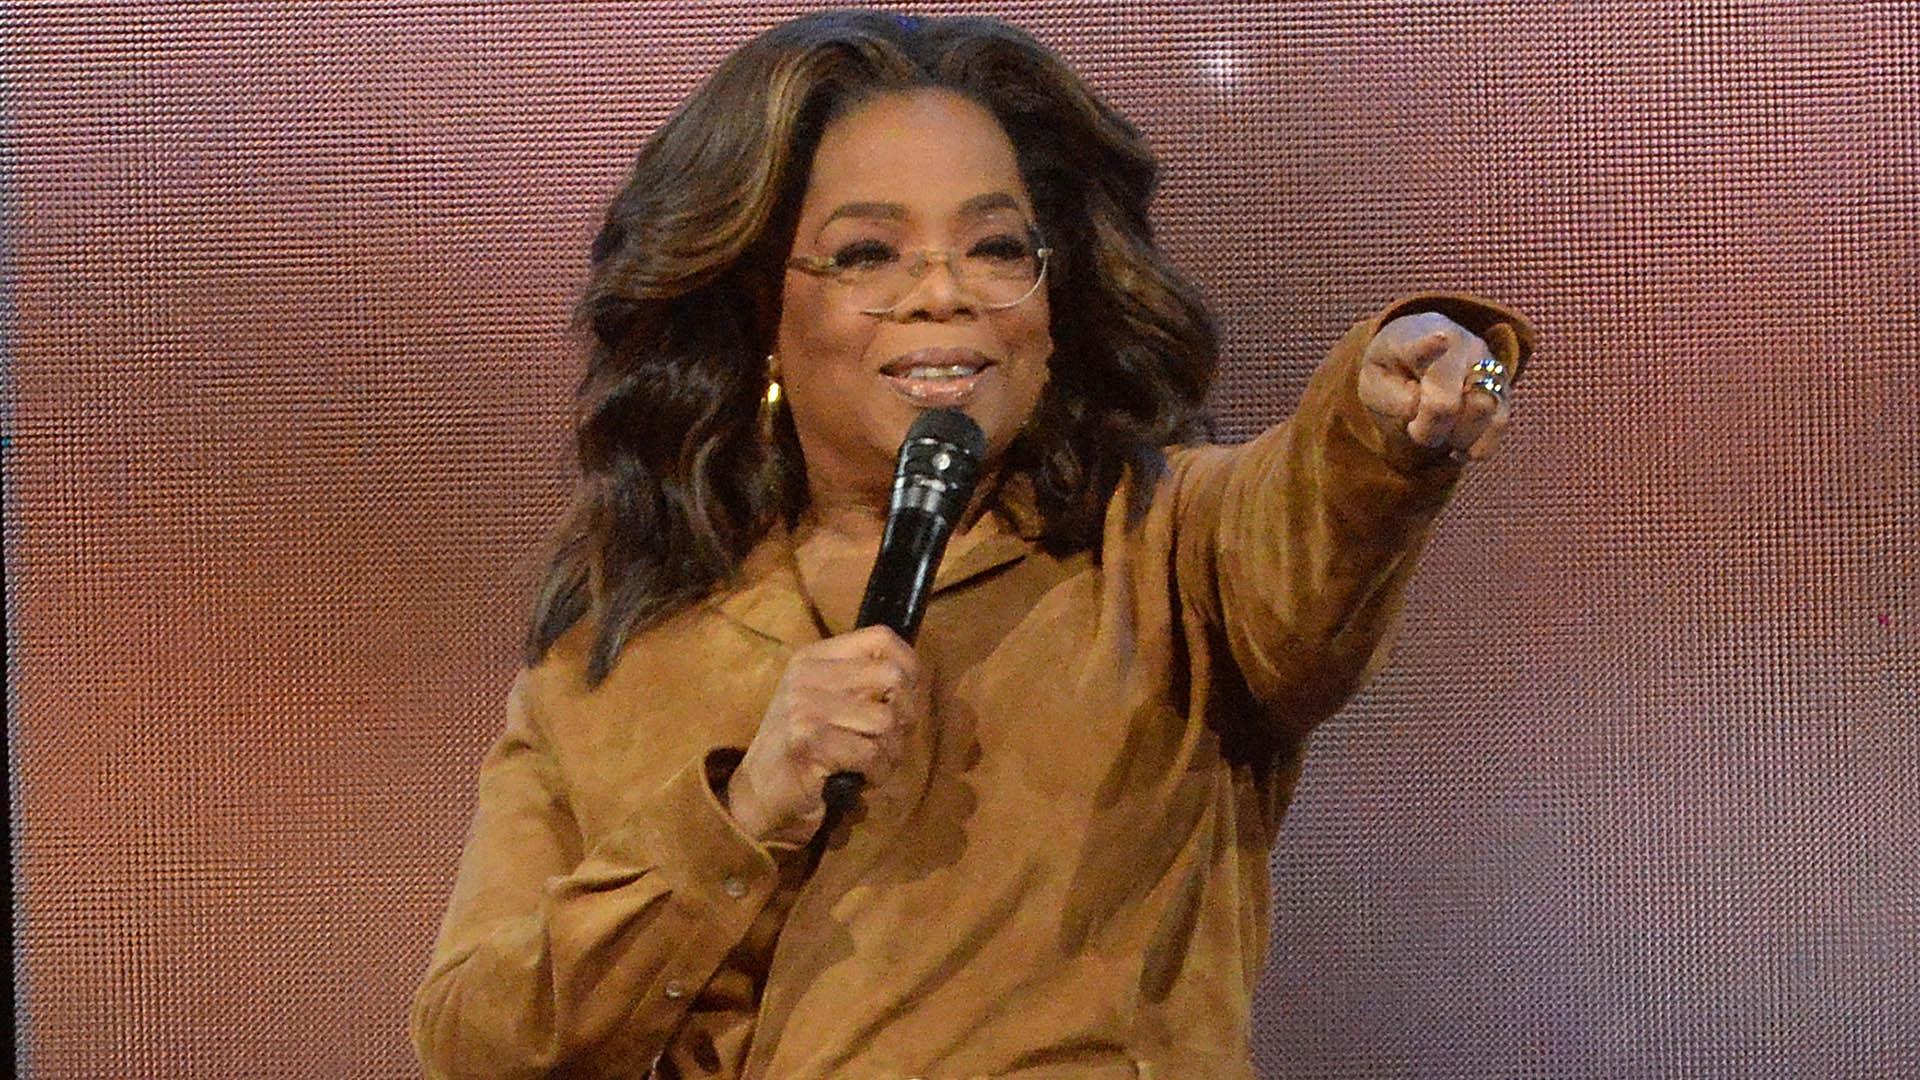 This Feb. 8, 2020 file photo shows Oprah Winfrey during “Oprah’s 2020 Vision: Your Life in Focus” tour in New York. (Photo by Brad Barket / Invision / AP, File)